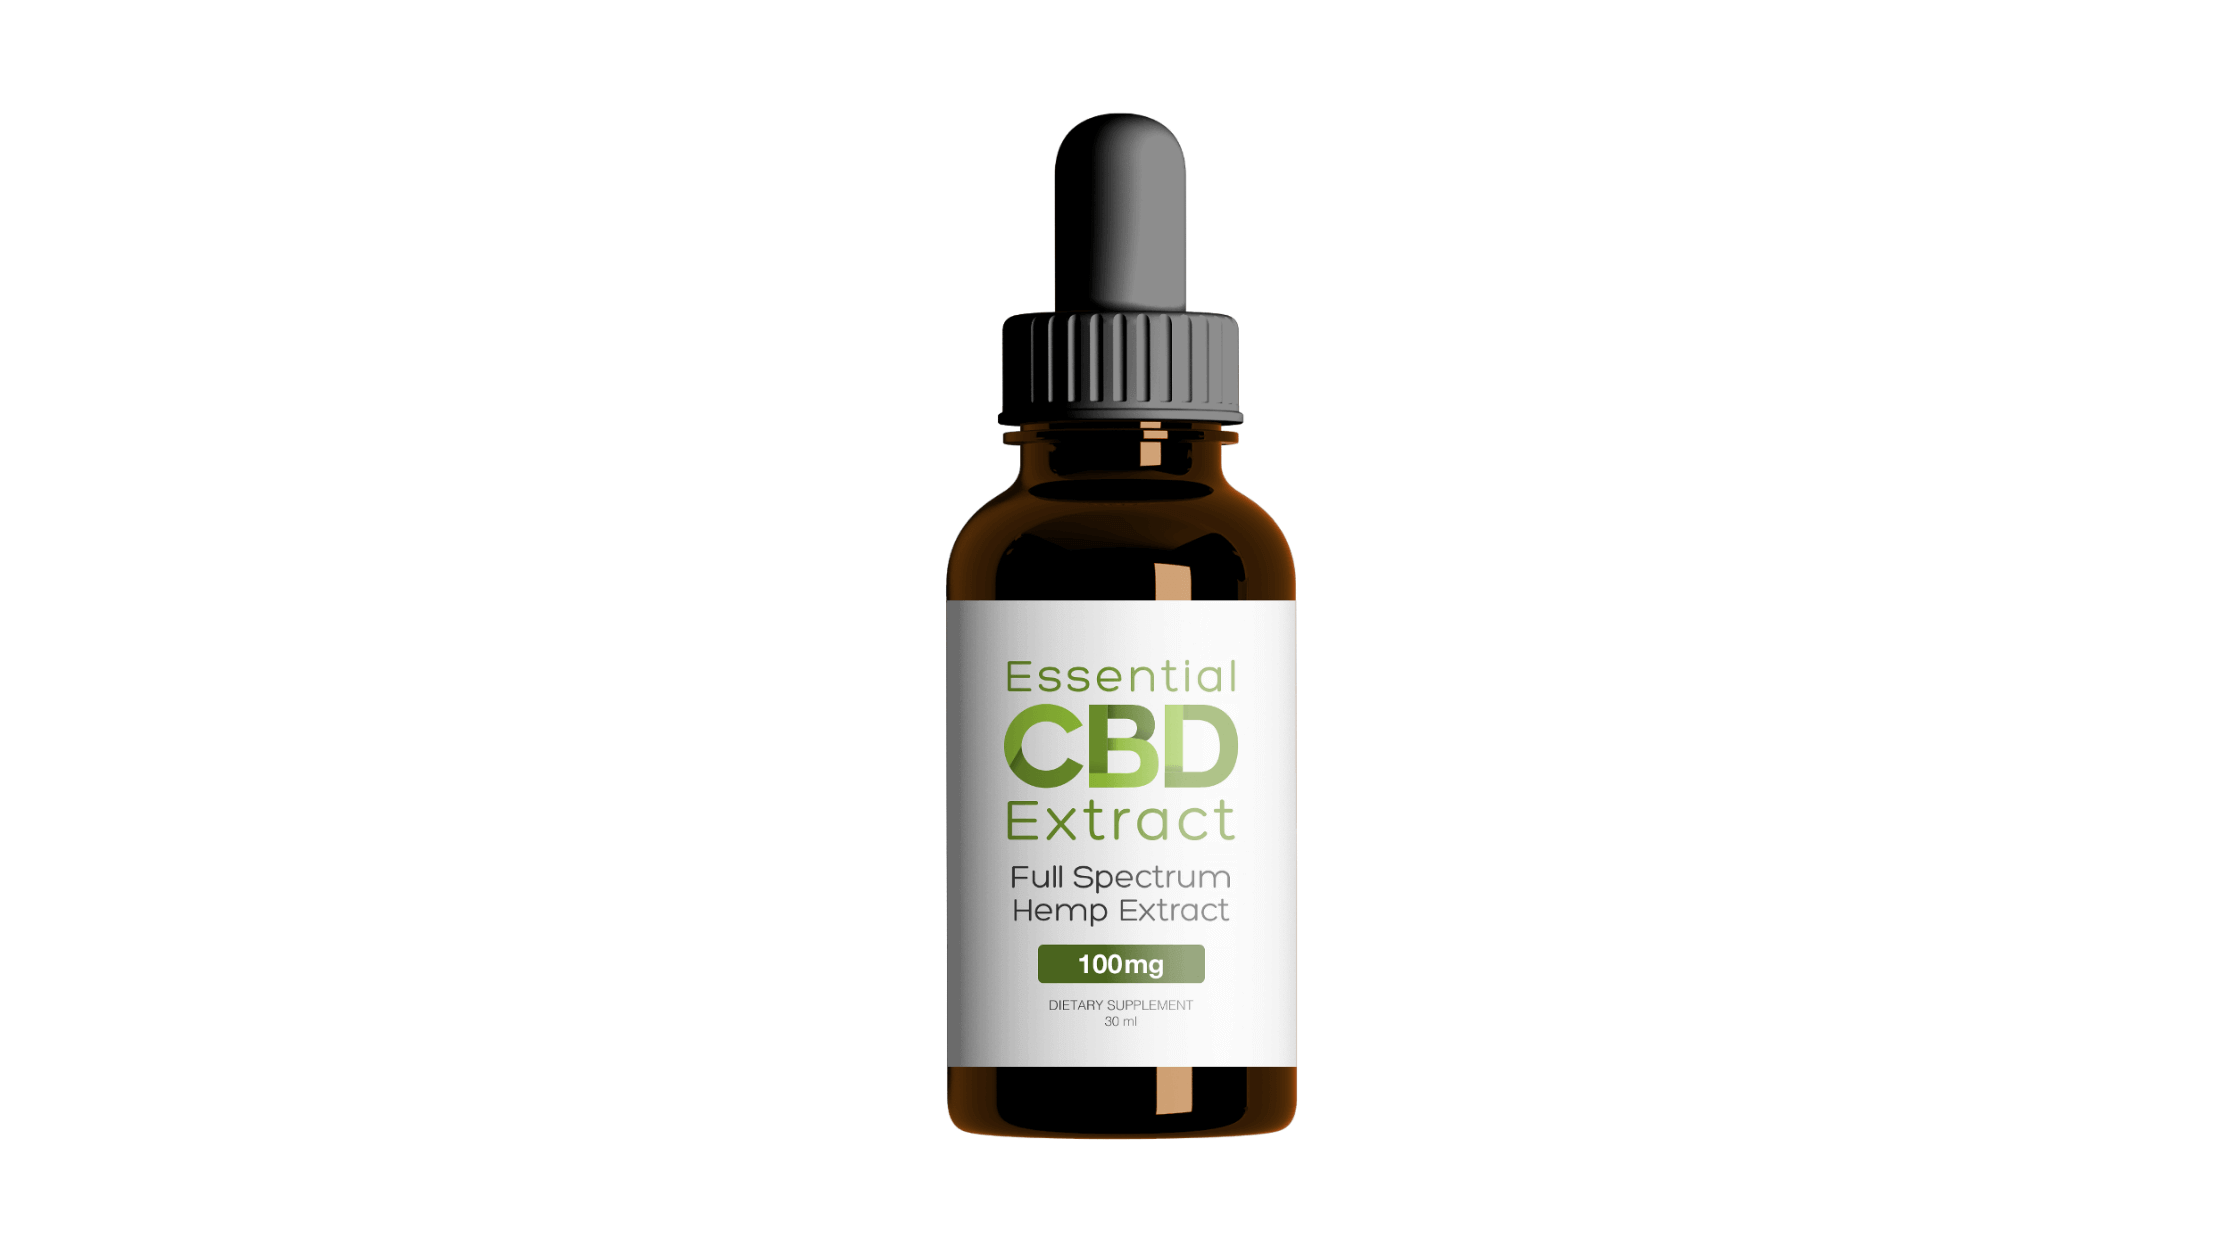 Essential CBD Extract Oil Reviews - Regular Fit Health Official Website